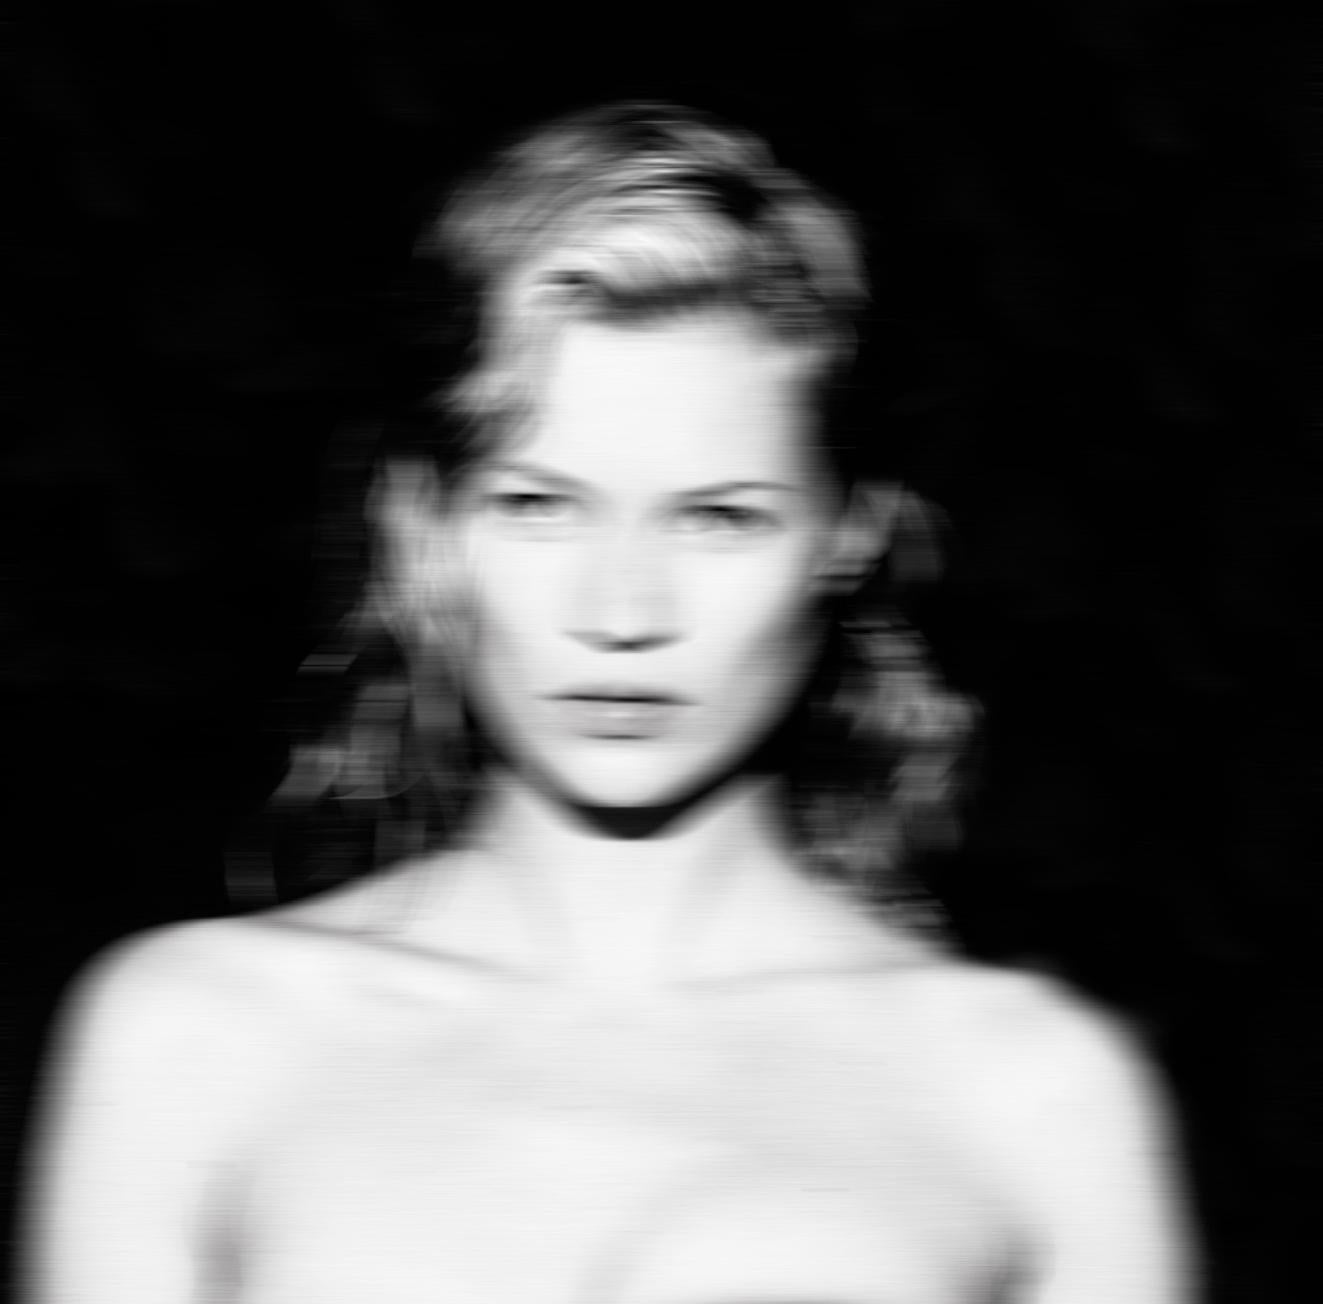 Unknown Nude Print - Kate II - Oversize limited edition - Kate Moss